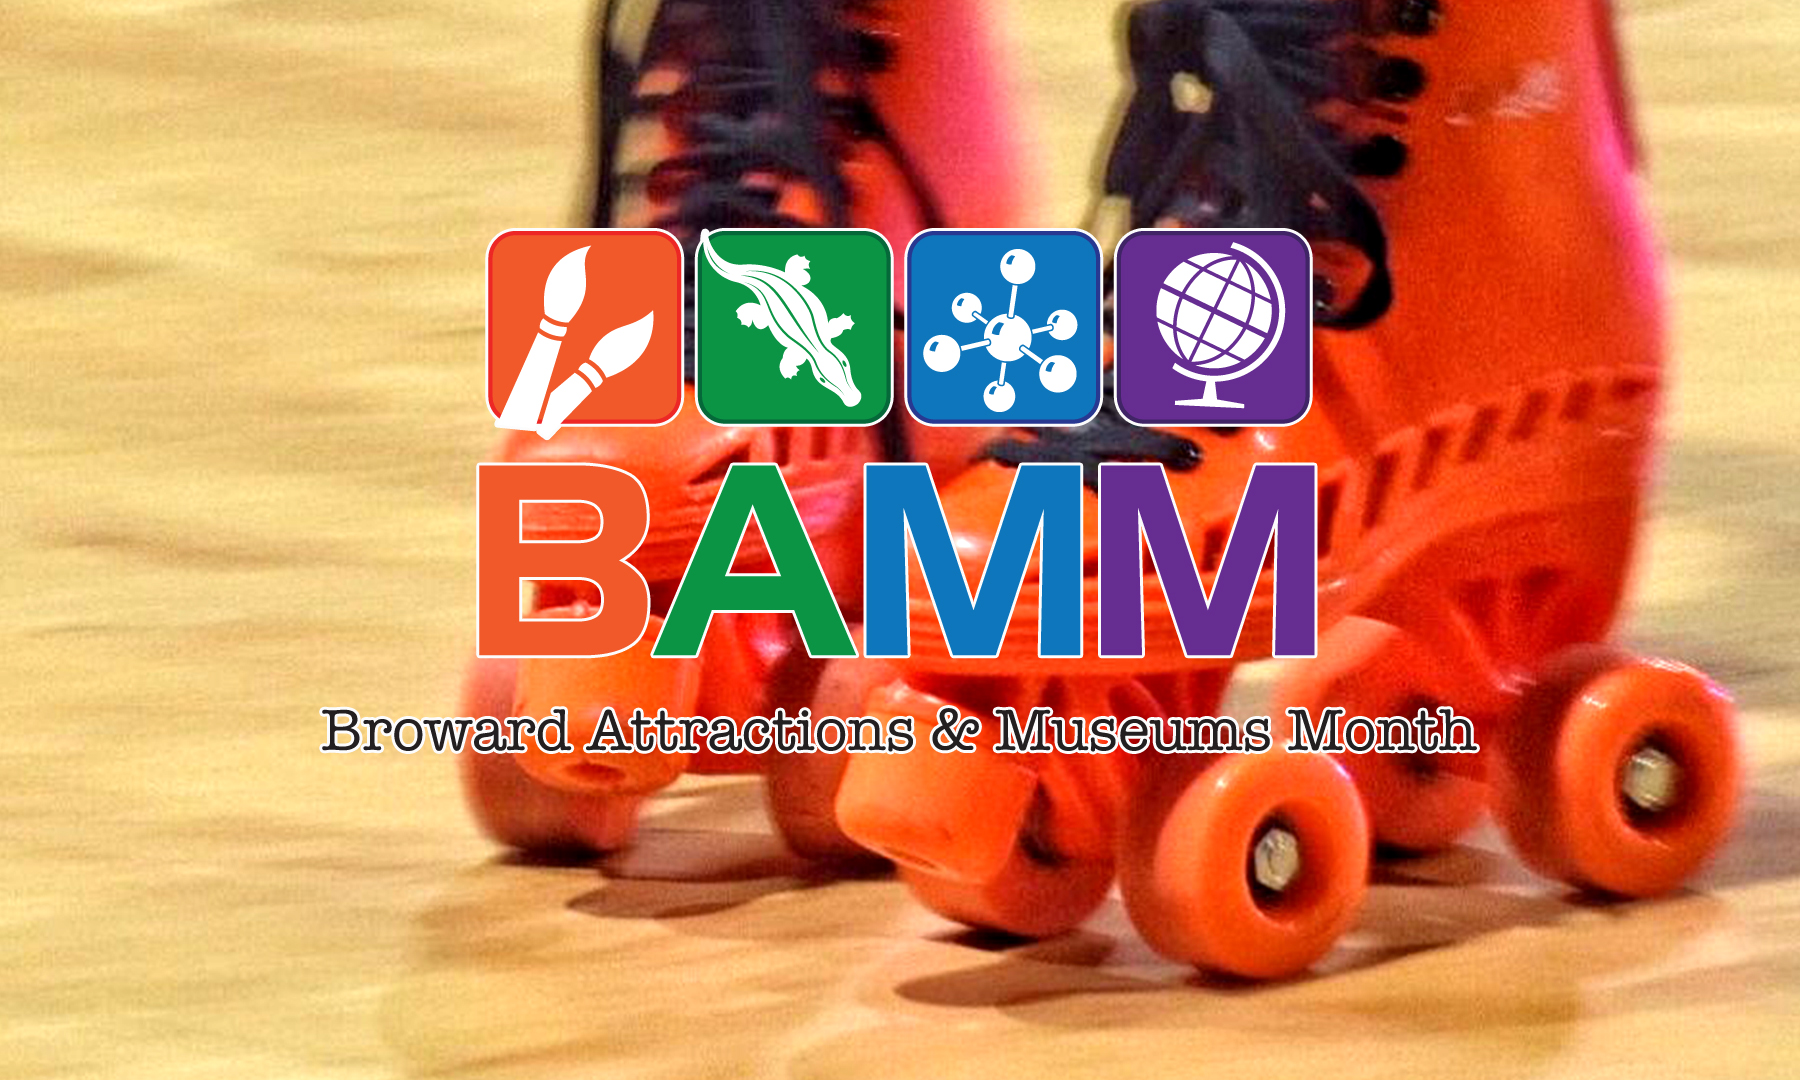 Broward Attractions & Museum Month (BAMM) September 2018